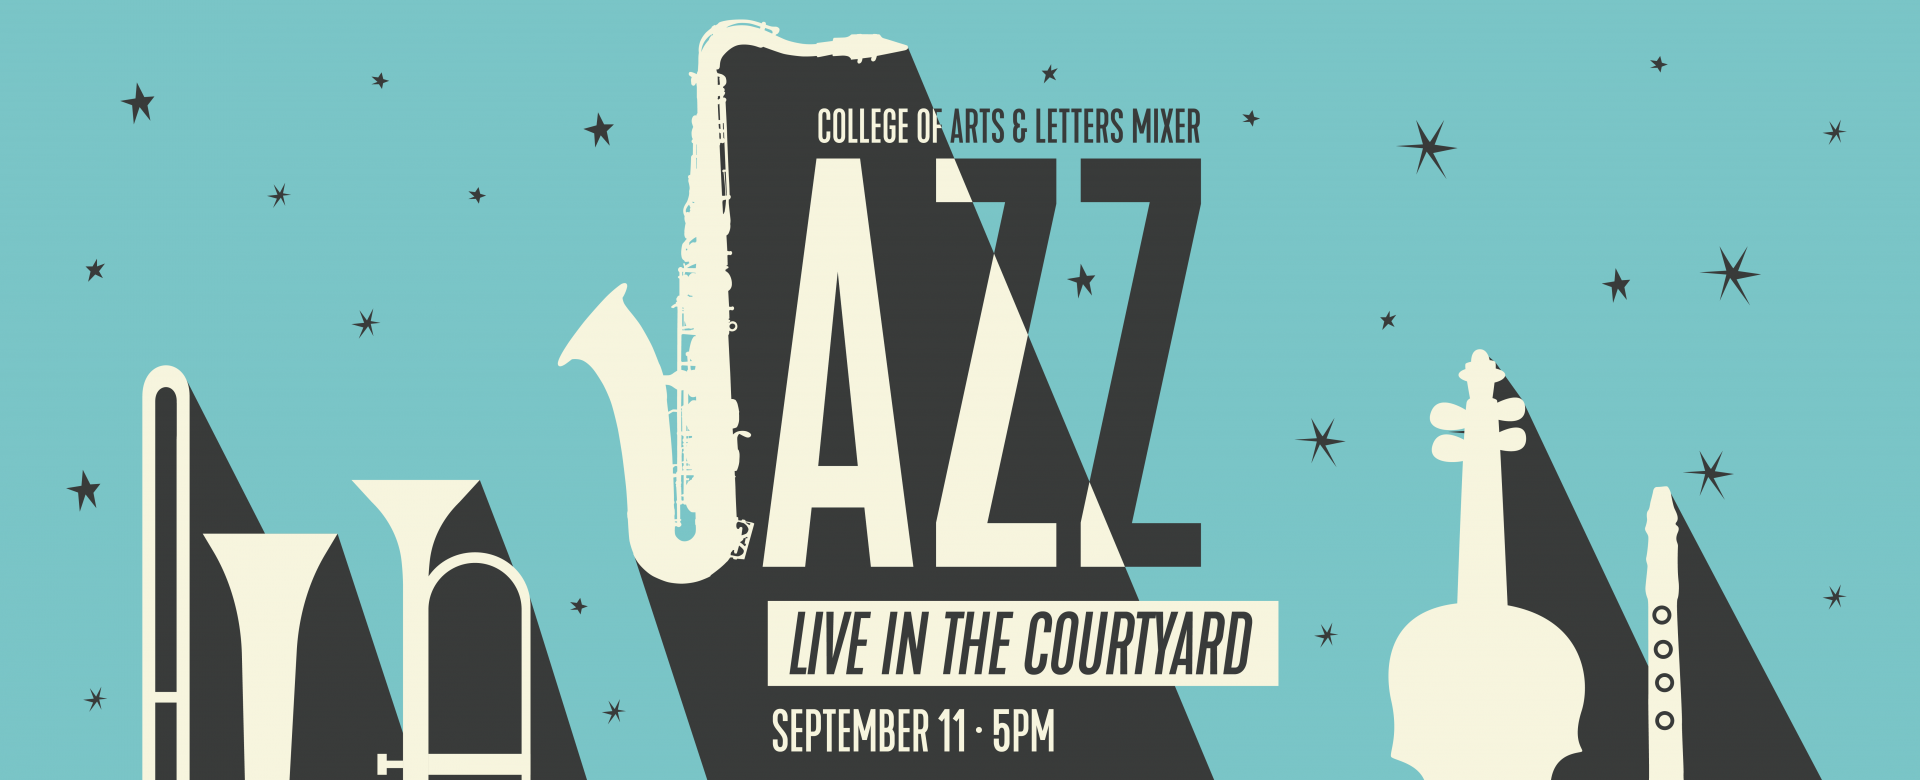 ARTS & LETTERS MIXER: LIVE JAZZ IN THE COURTYARD